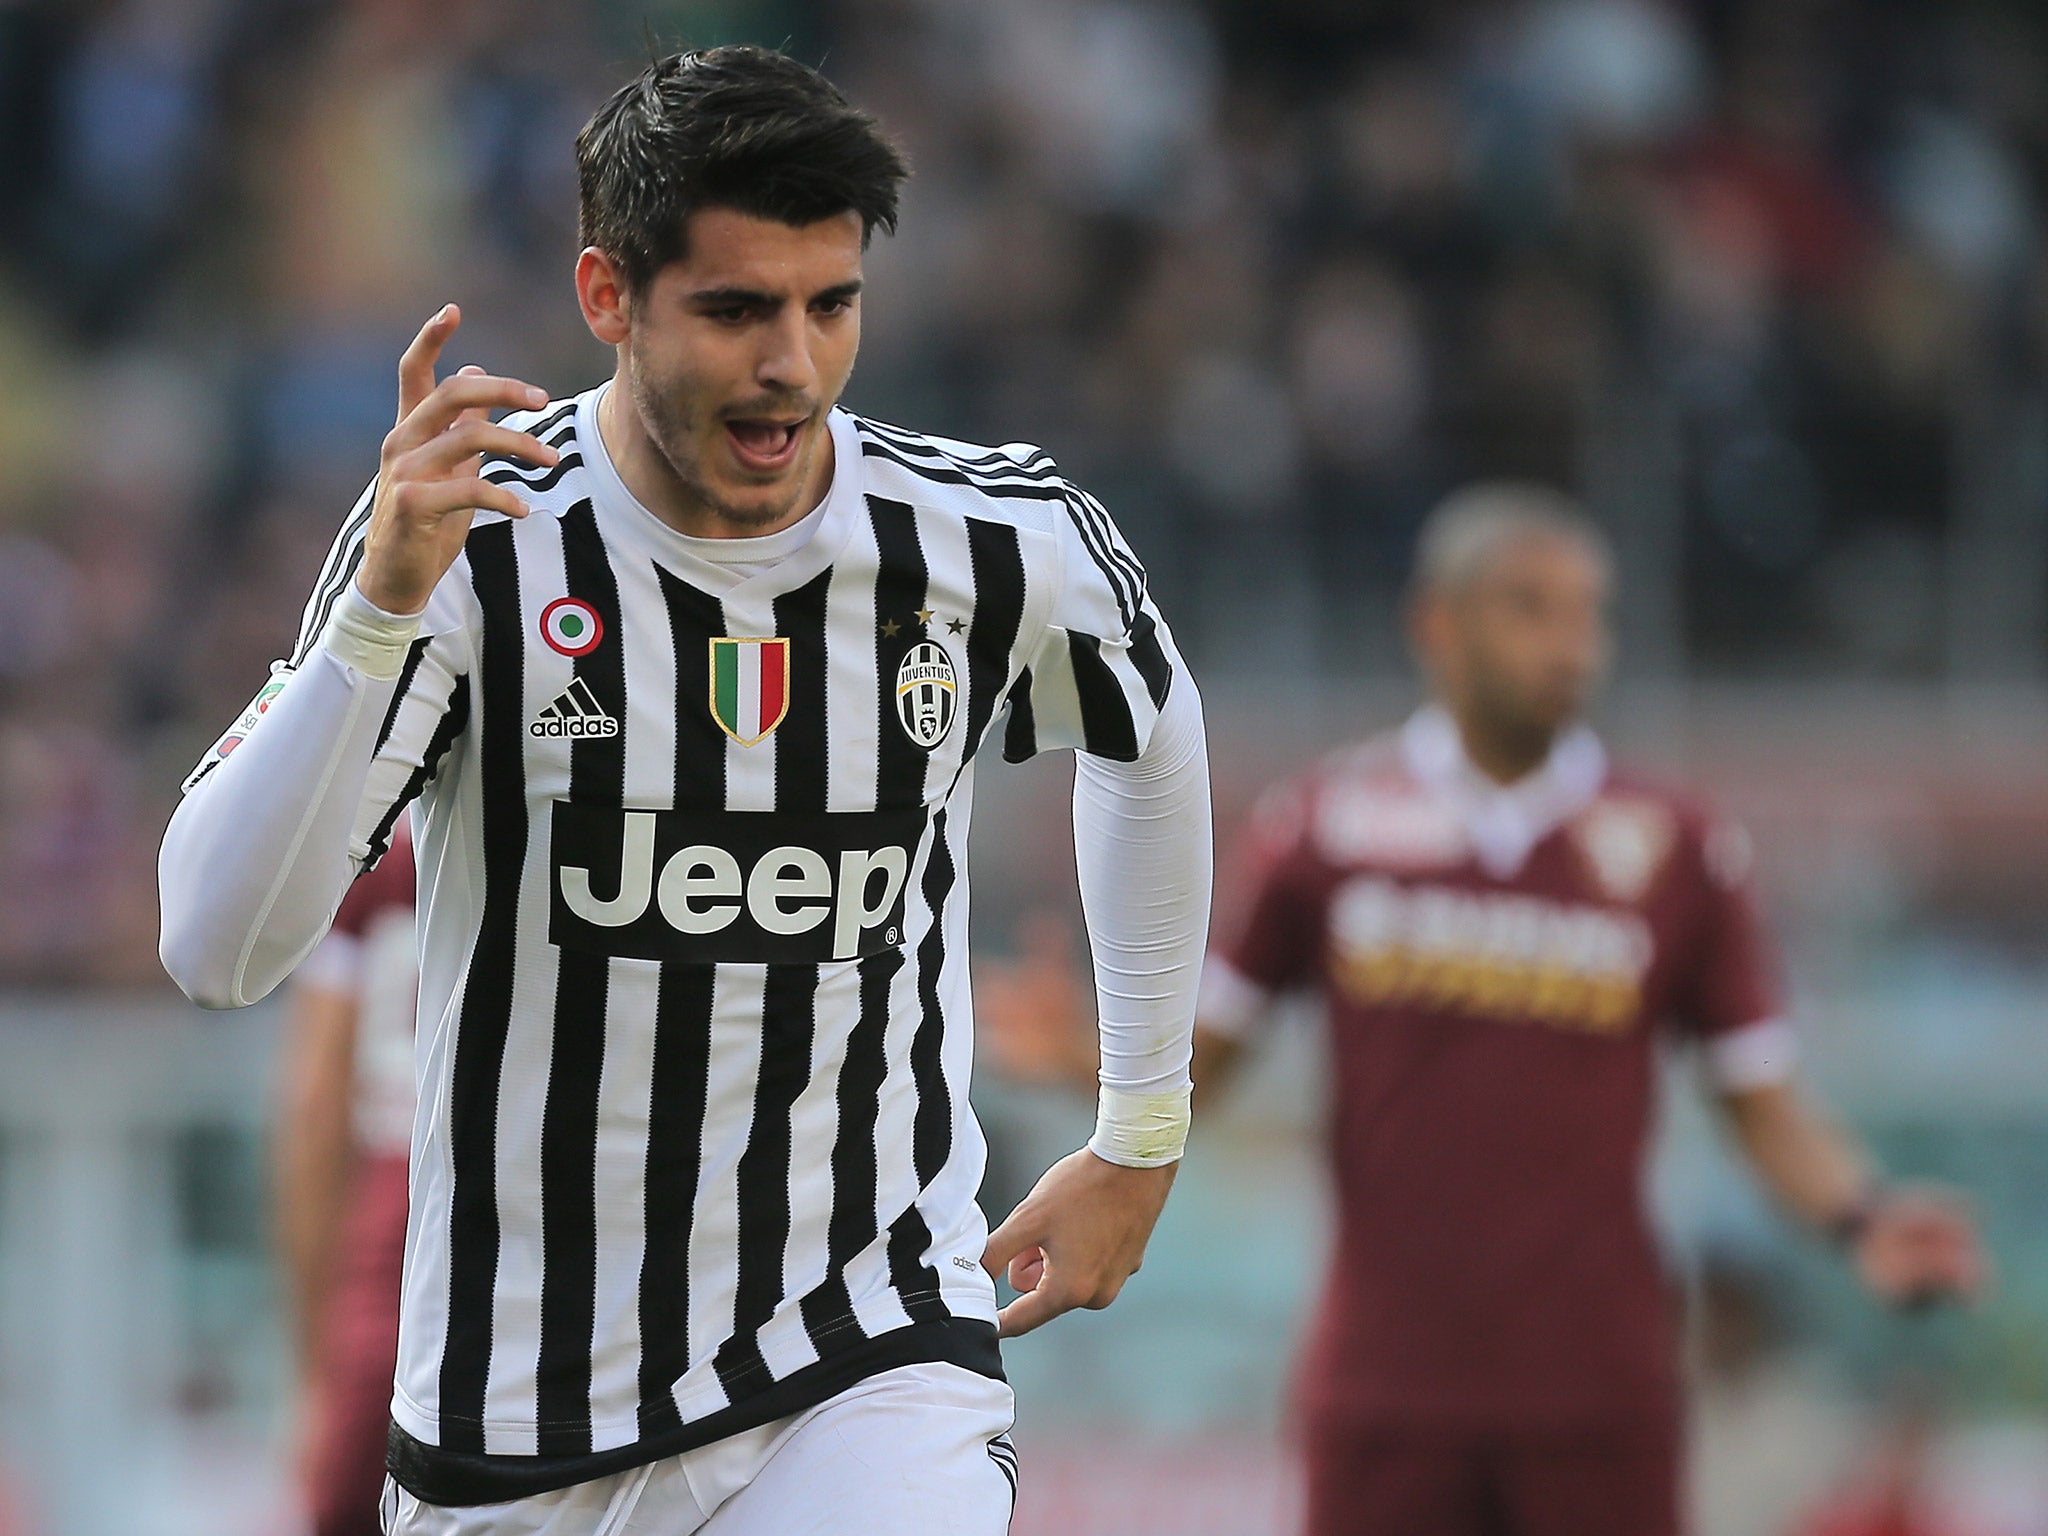 Juventus striker Alvaro Morata could be signed by Real Madrid before being sold on to Arsenal